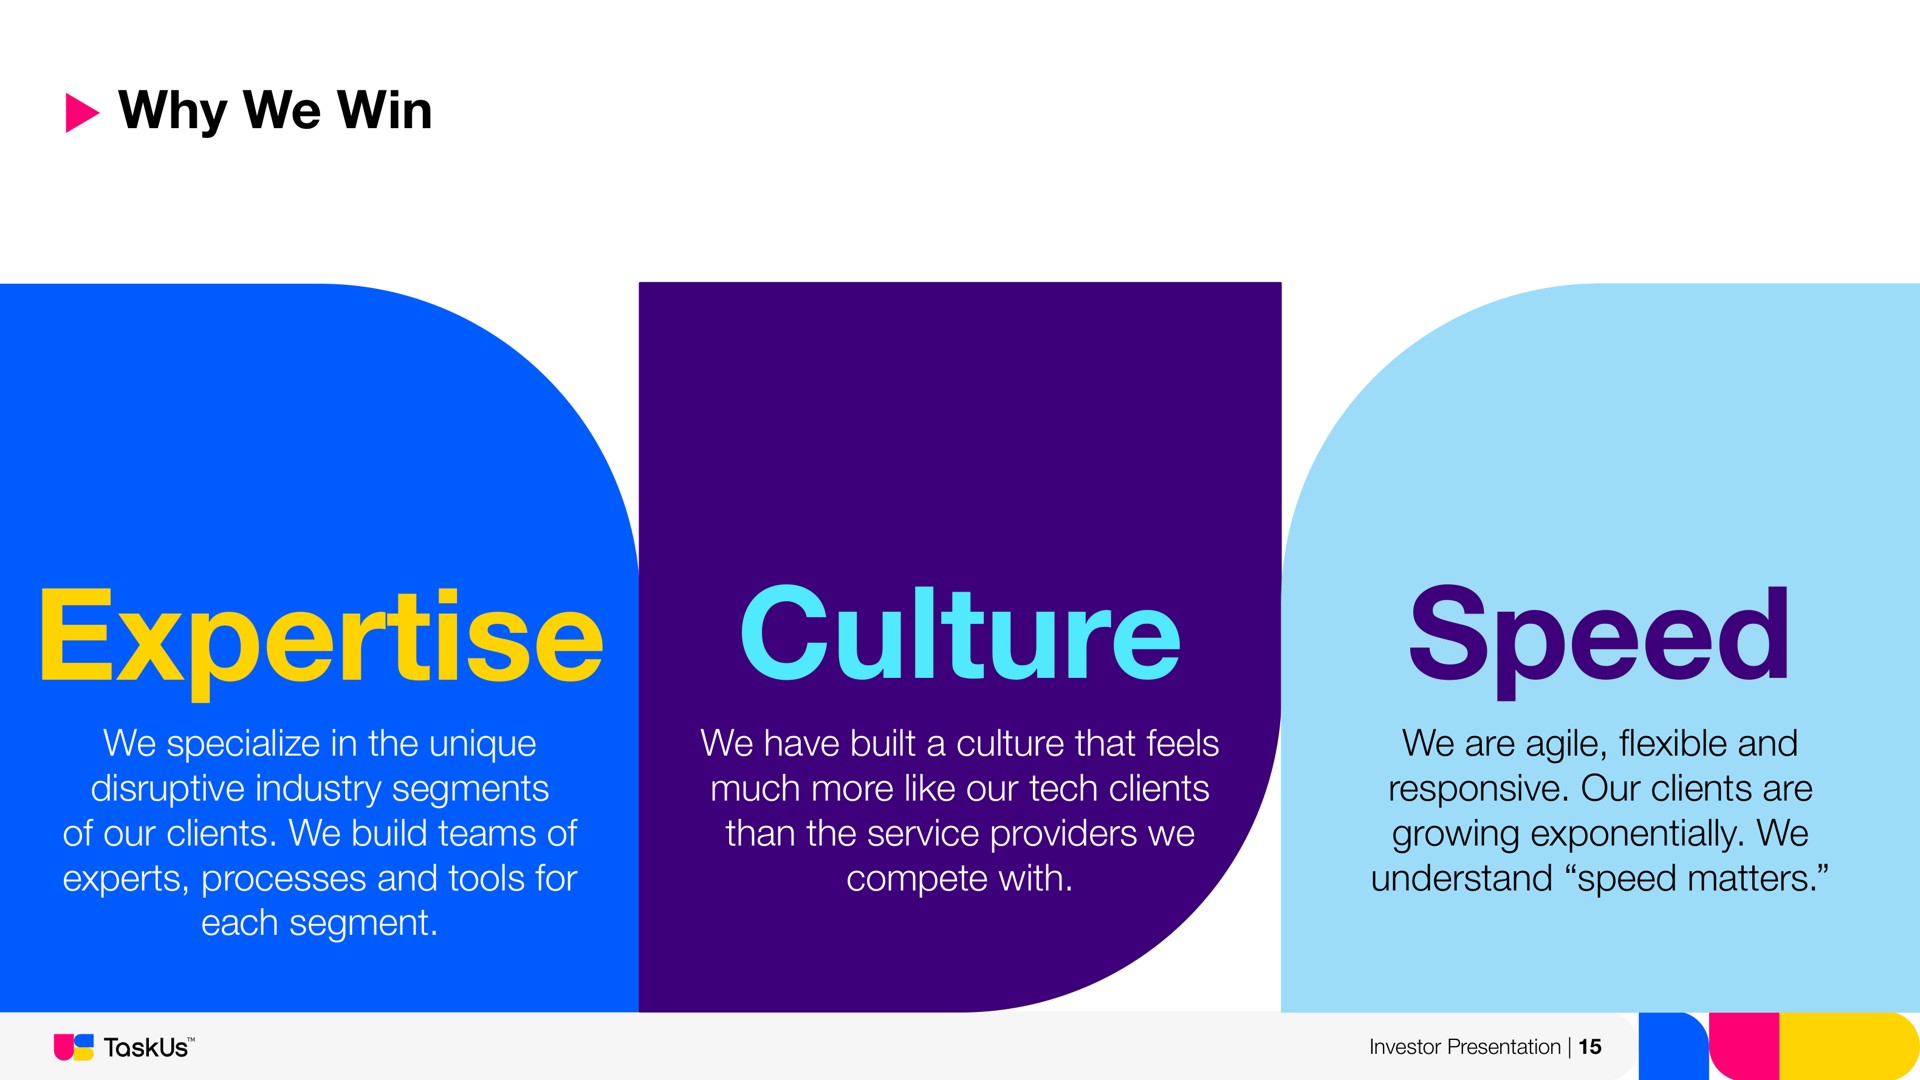 why we win culture we specialize in the unique disruptive industry segments of our clients we build teams of experts processes and tools for each segment we have built a culture that feels much more like our tech clients than the service providers we compete with speed we are agile and responsive our clients are growing exponentially we understand speed matters investor presentation | TaskUs